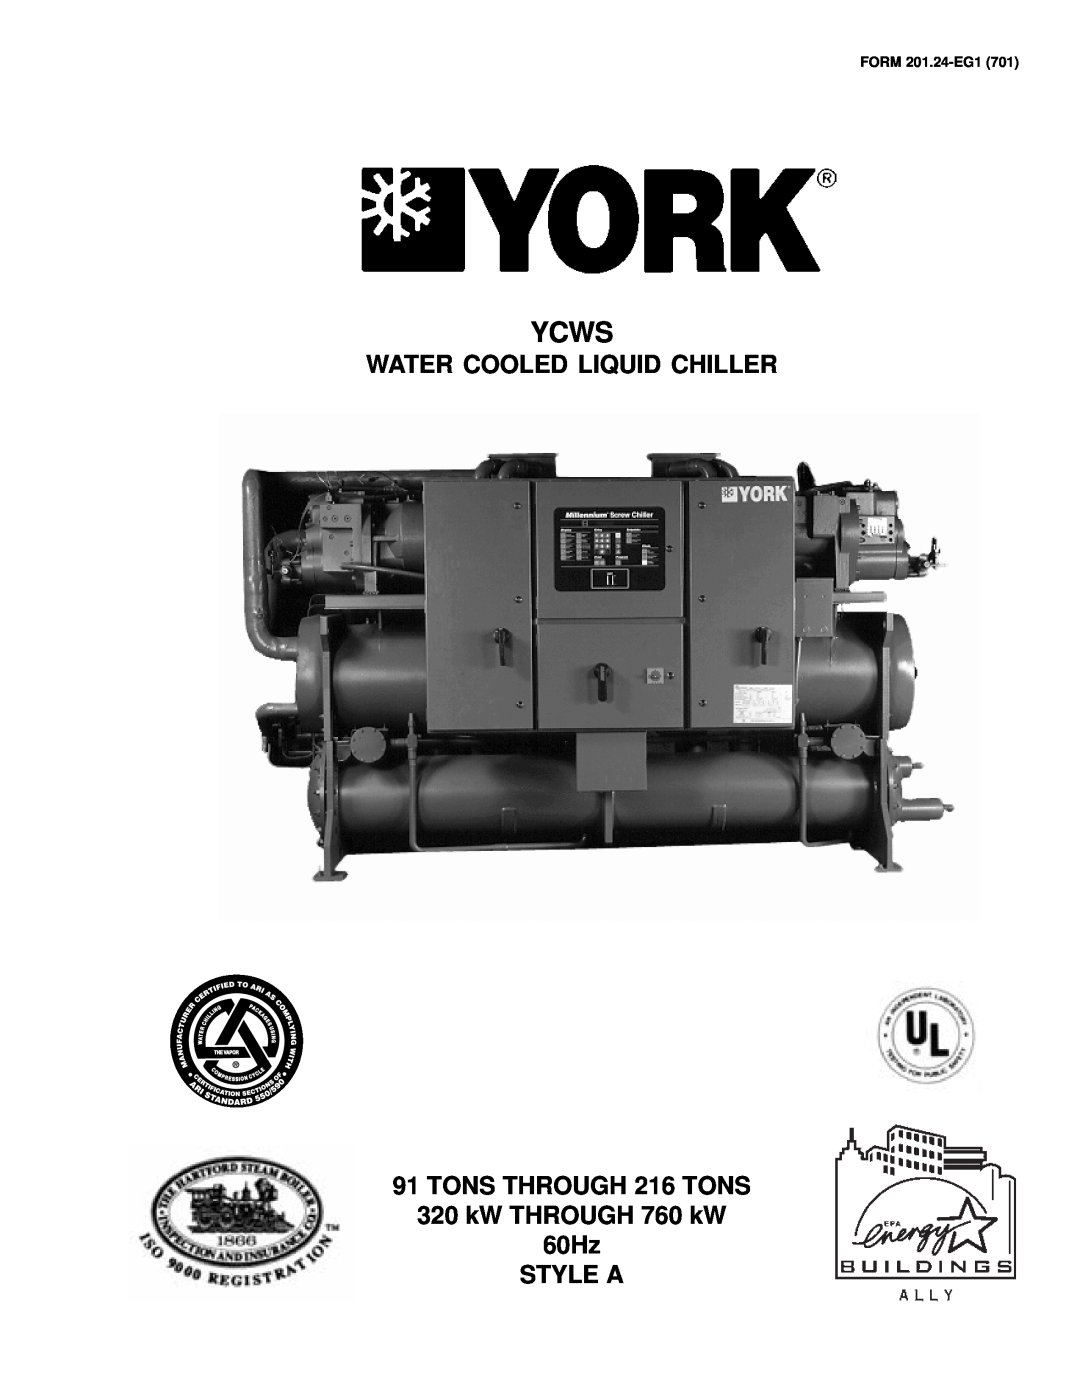 York YCWS manual Water Cooled Liquid Chiller, TONS THROUGH 216 TONS 320 kW THROUGH 760 kW, 60Hz STYLE A, Ycws 